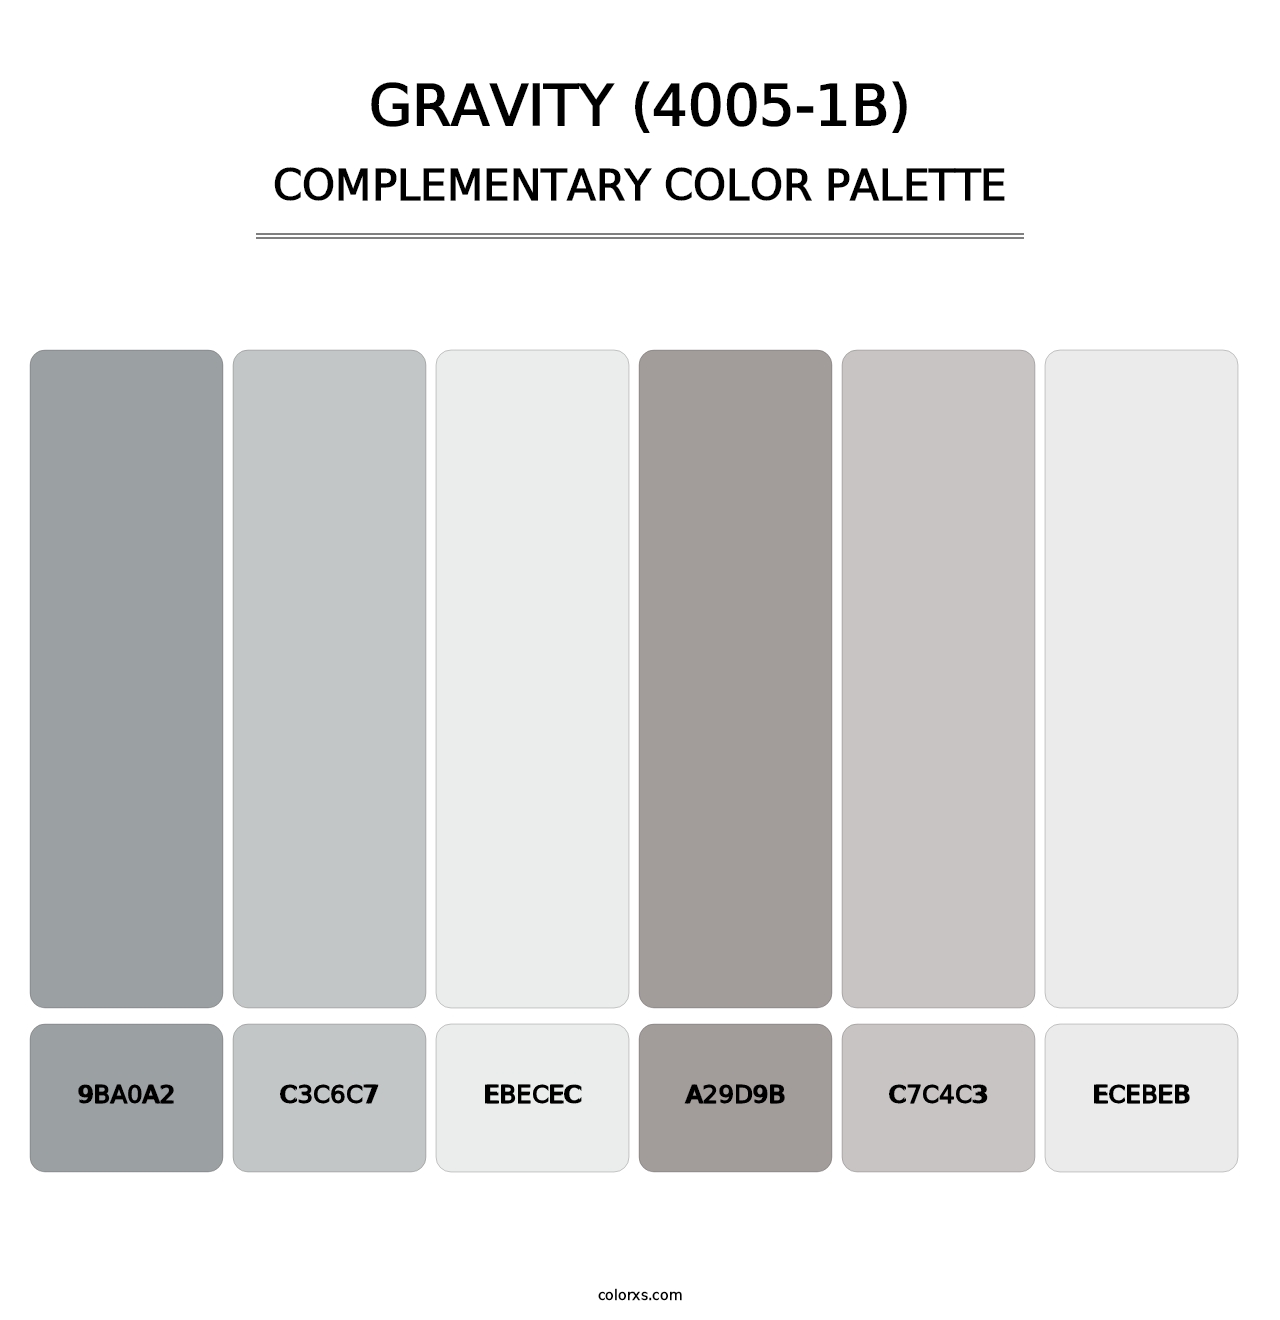 Gravity (4005-1B) - Complementary Color Palette